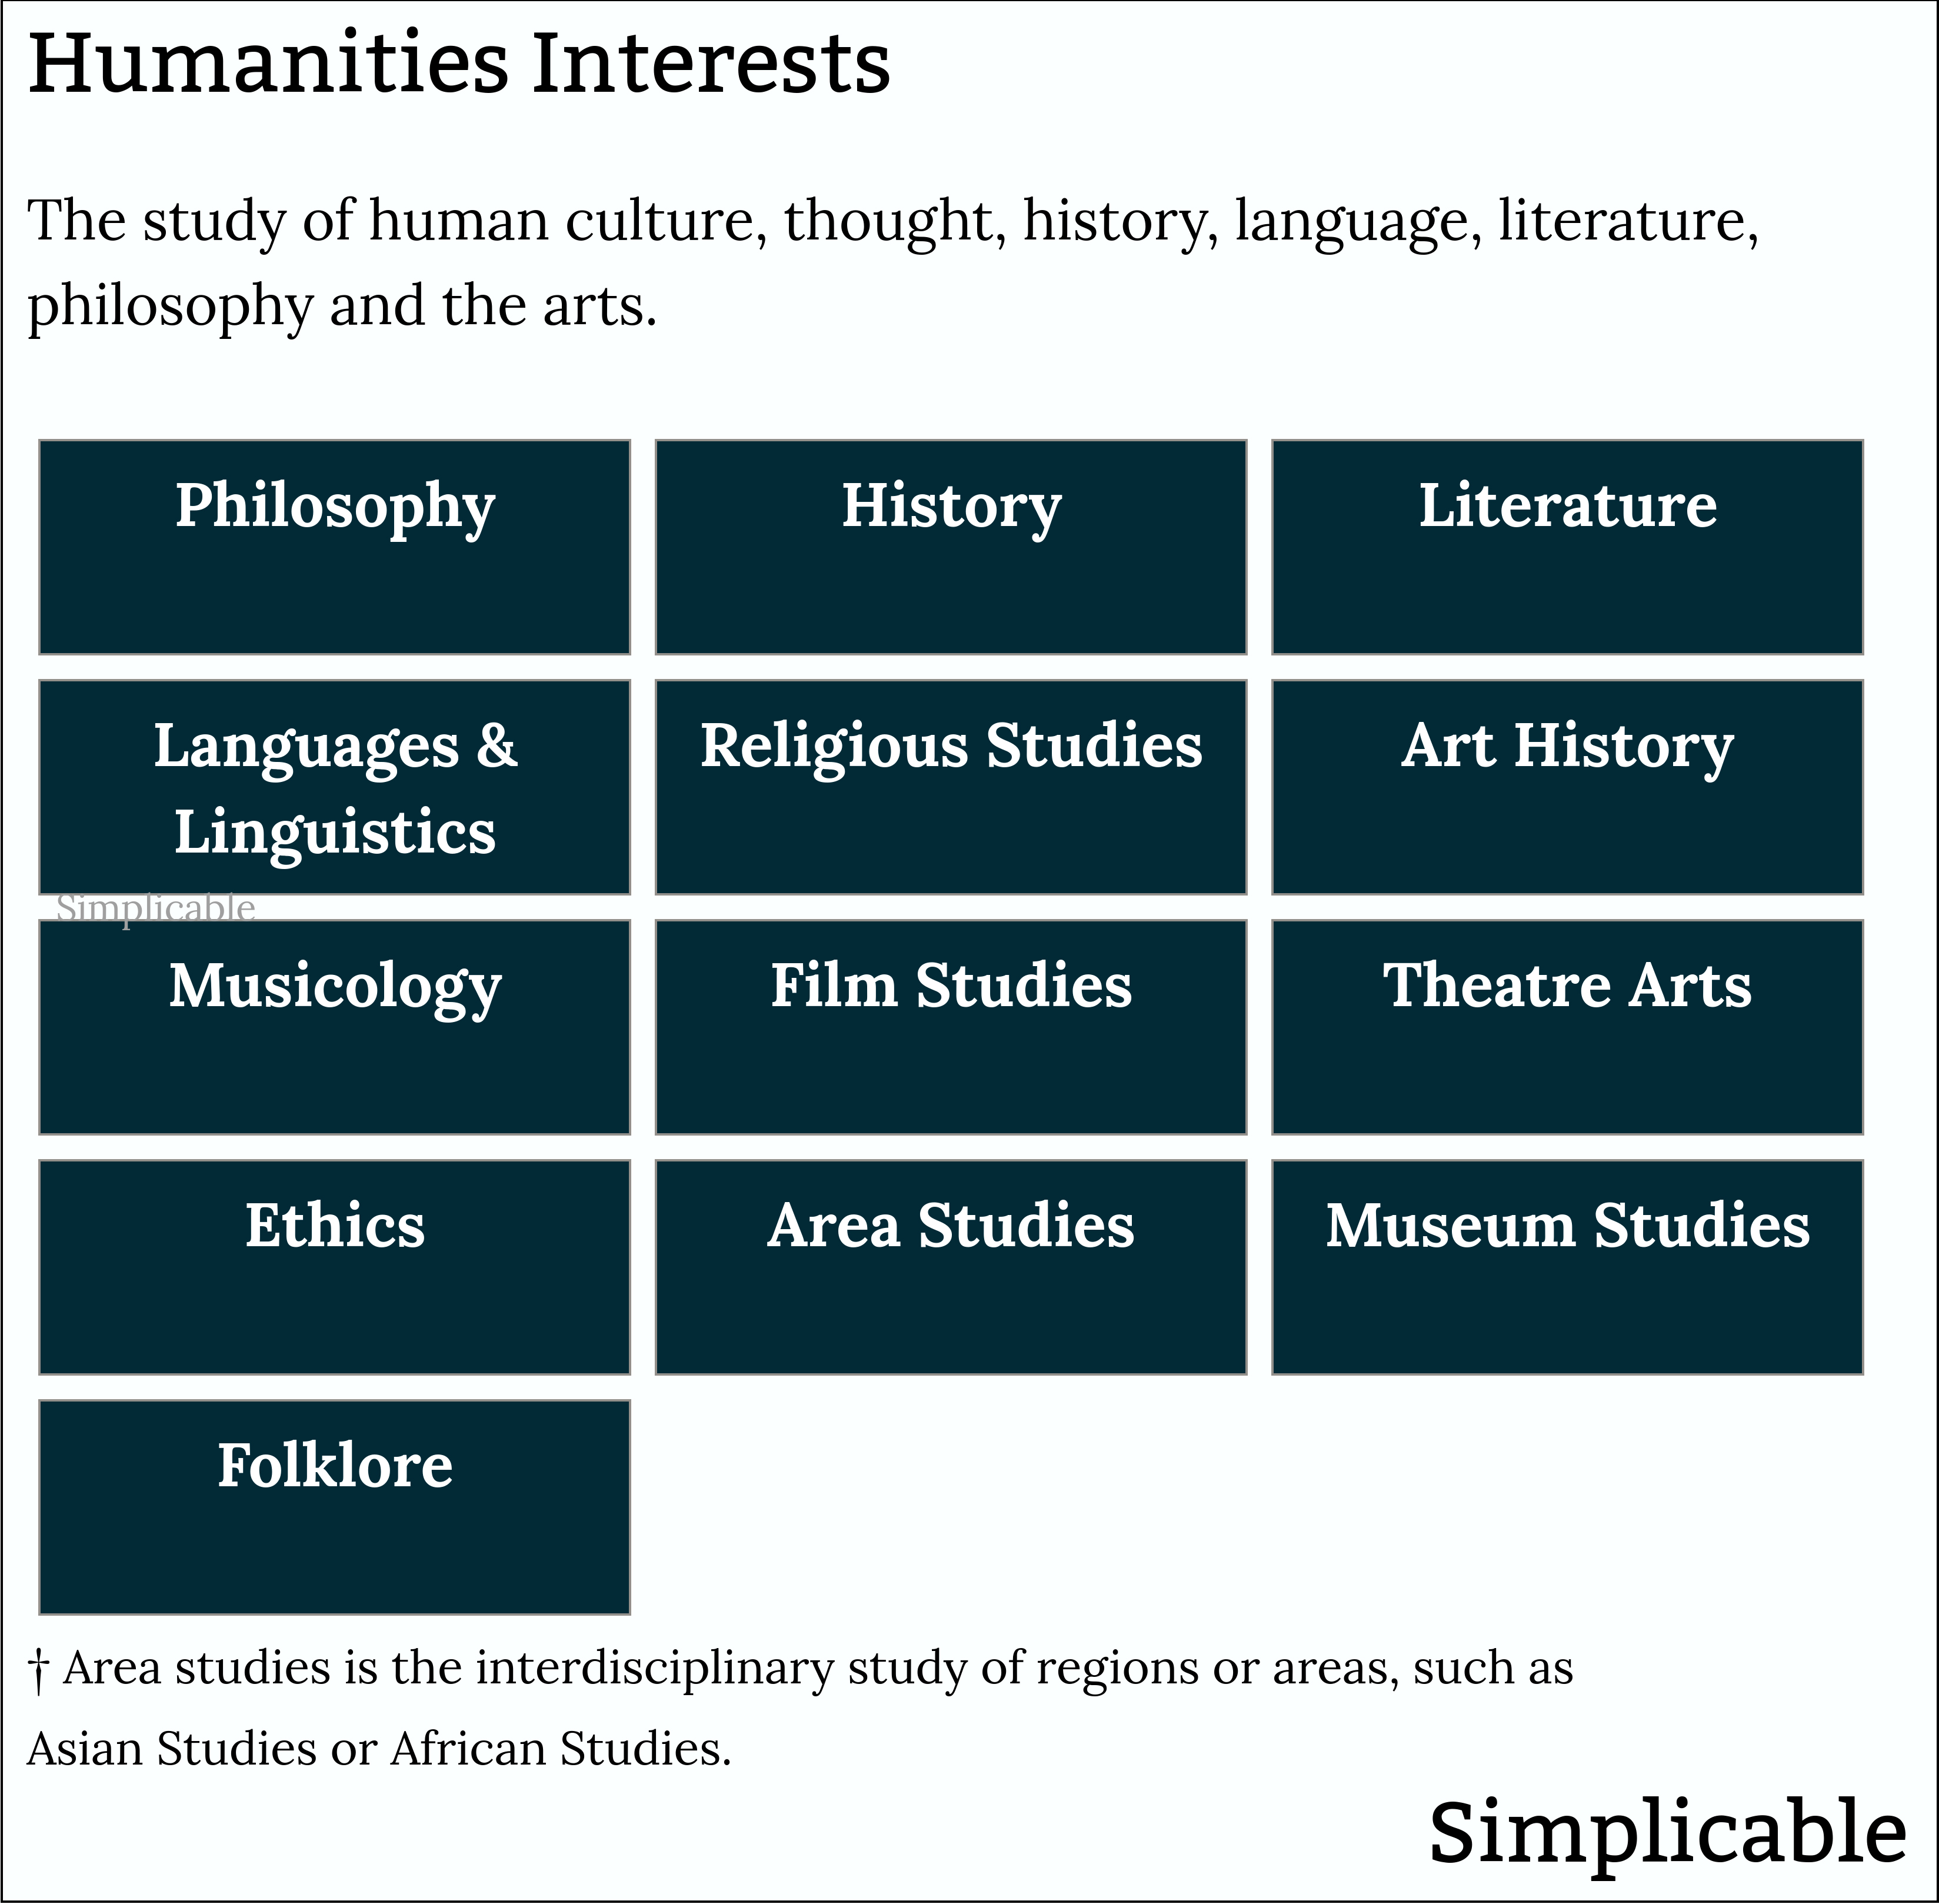 examples of humanities interests